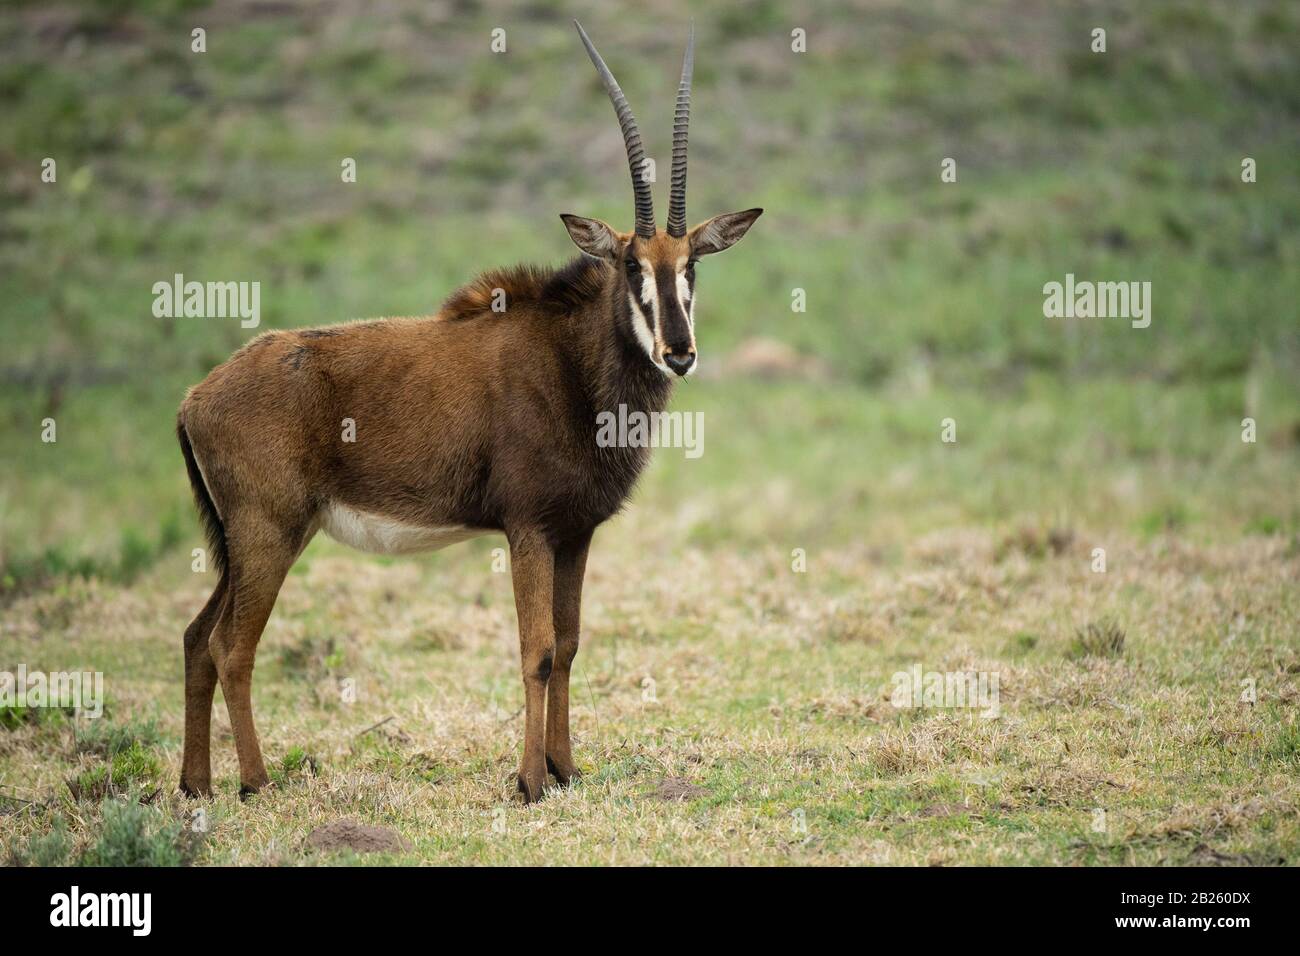 Sable Antelope, Hippotragus niger, Gondwana Game Reserve, Sud Africa Foto Stock